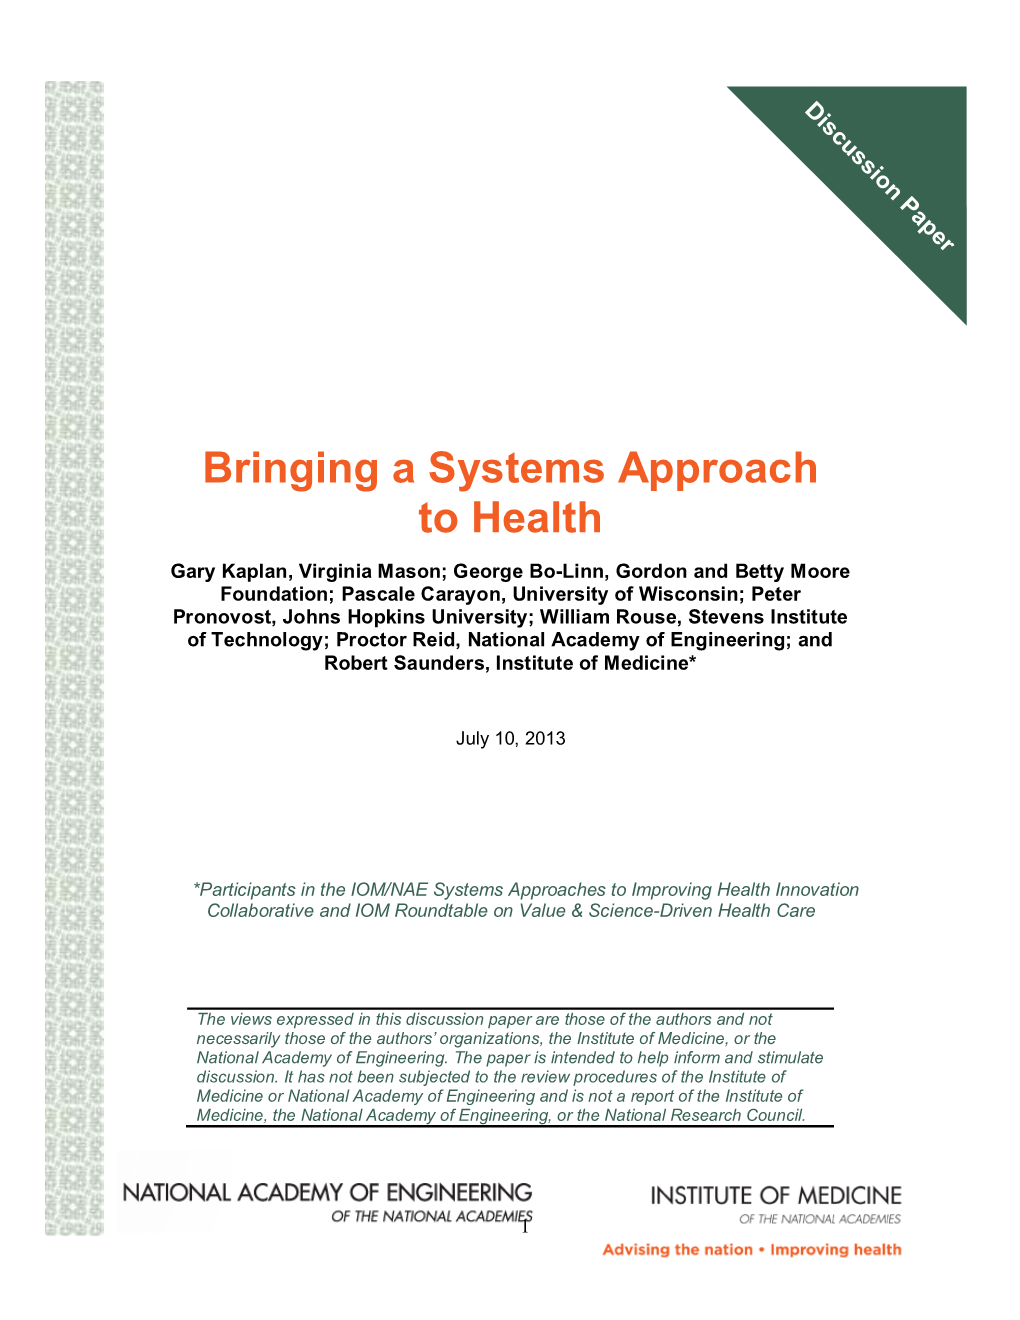 Bringing a Systems Approach to Health